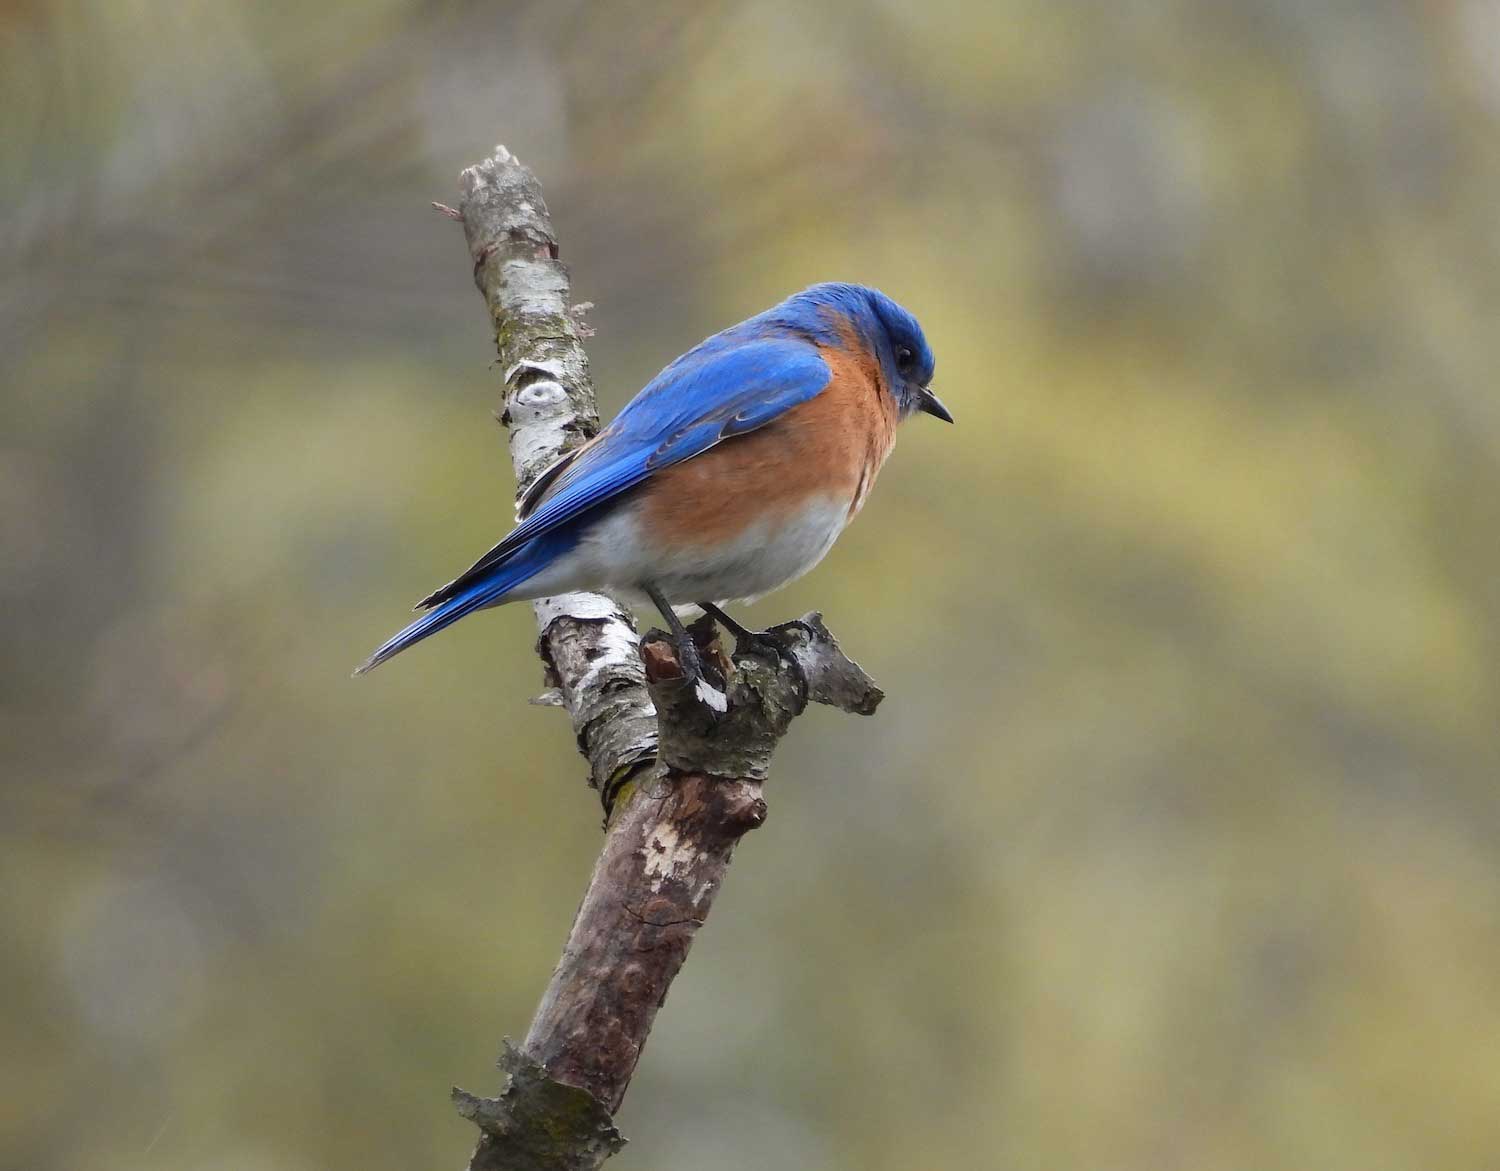 Bluebirds are back from the brink thanks to human interventions